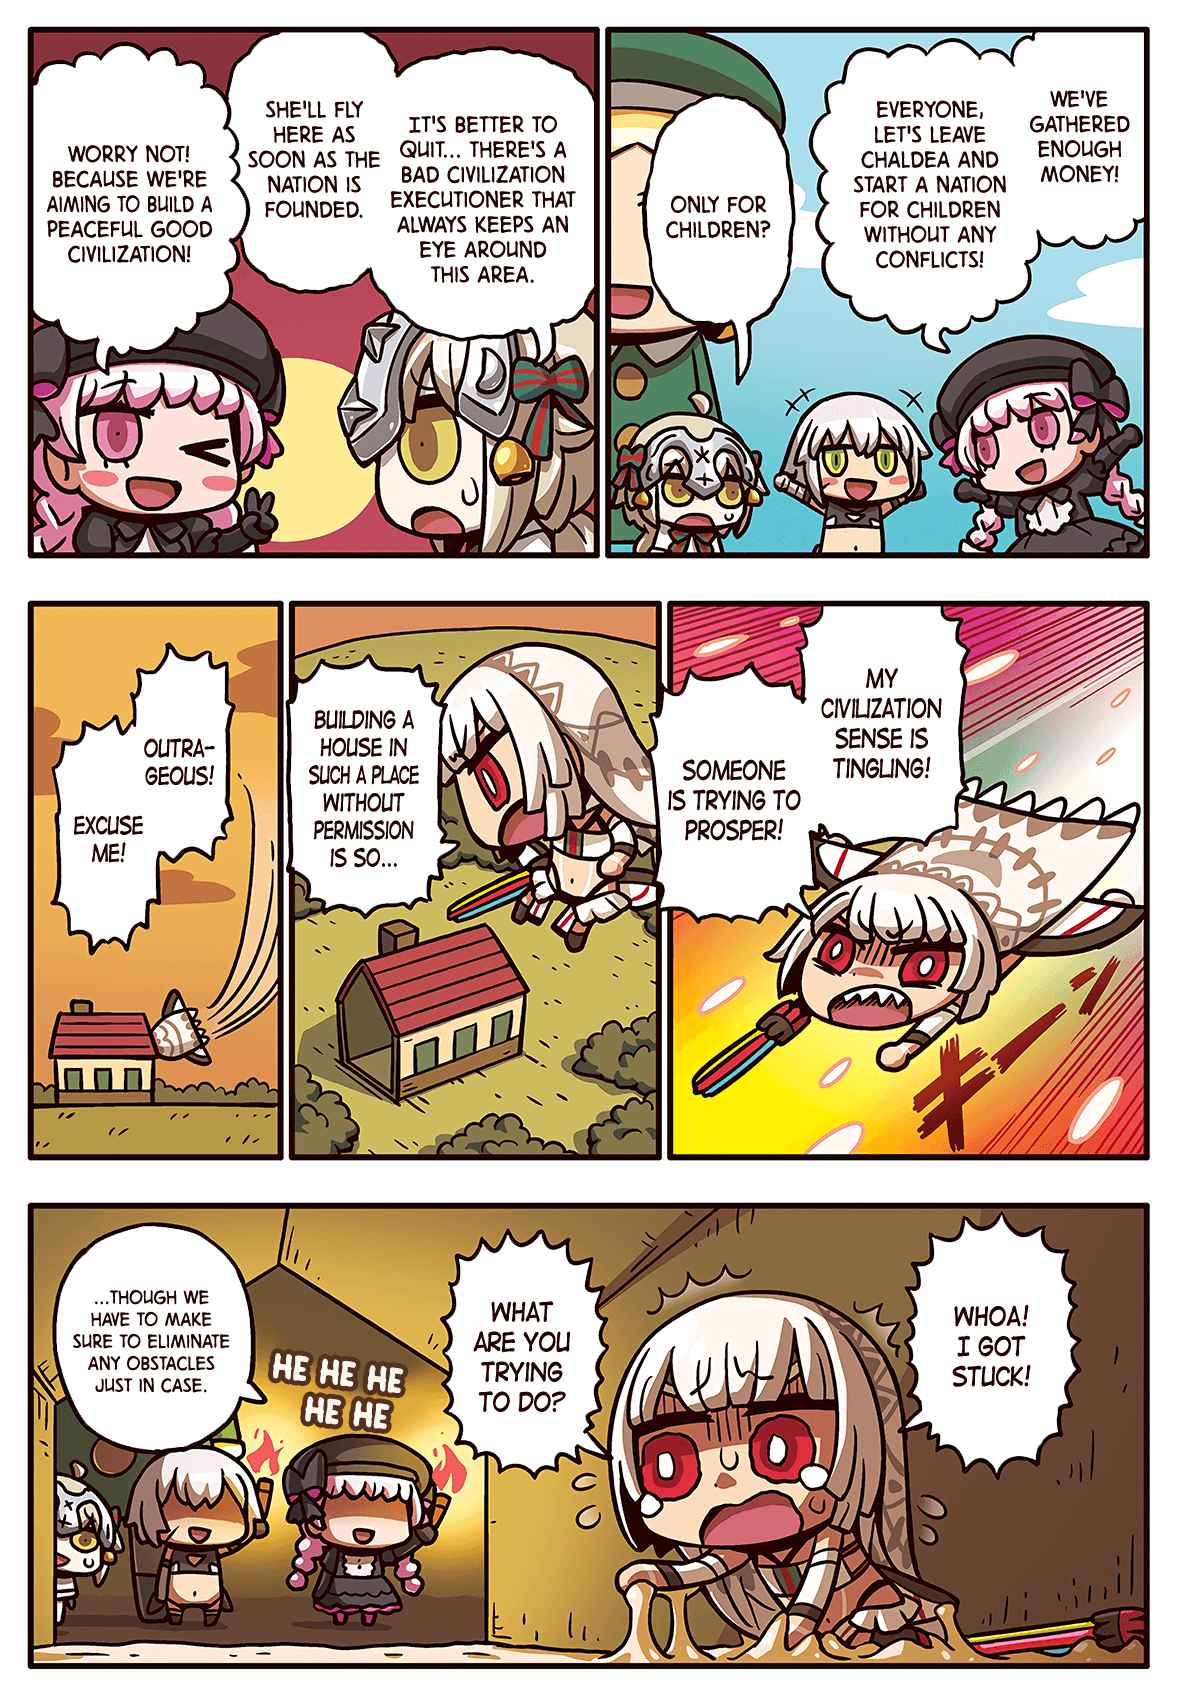 Motto Manga de Wakaru! Fate/Grand Order Ch. 76 A Nation Without Conflict